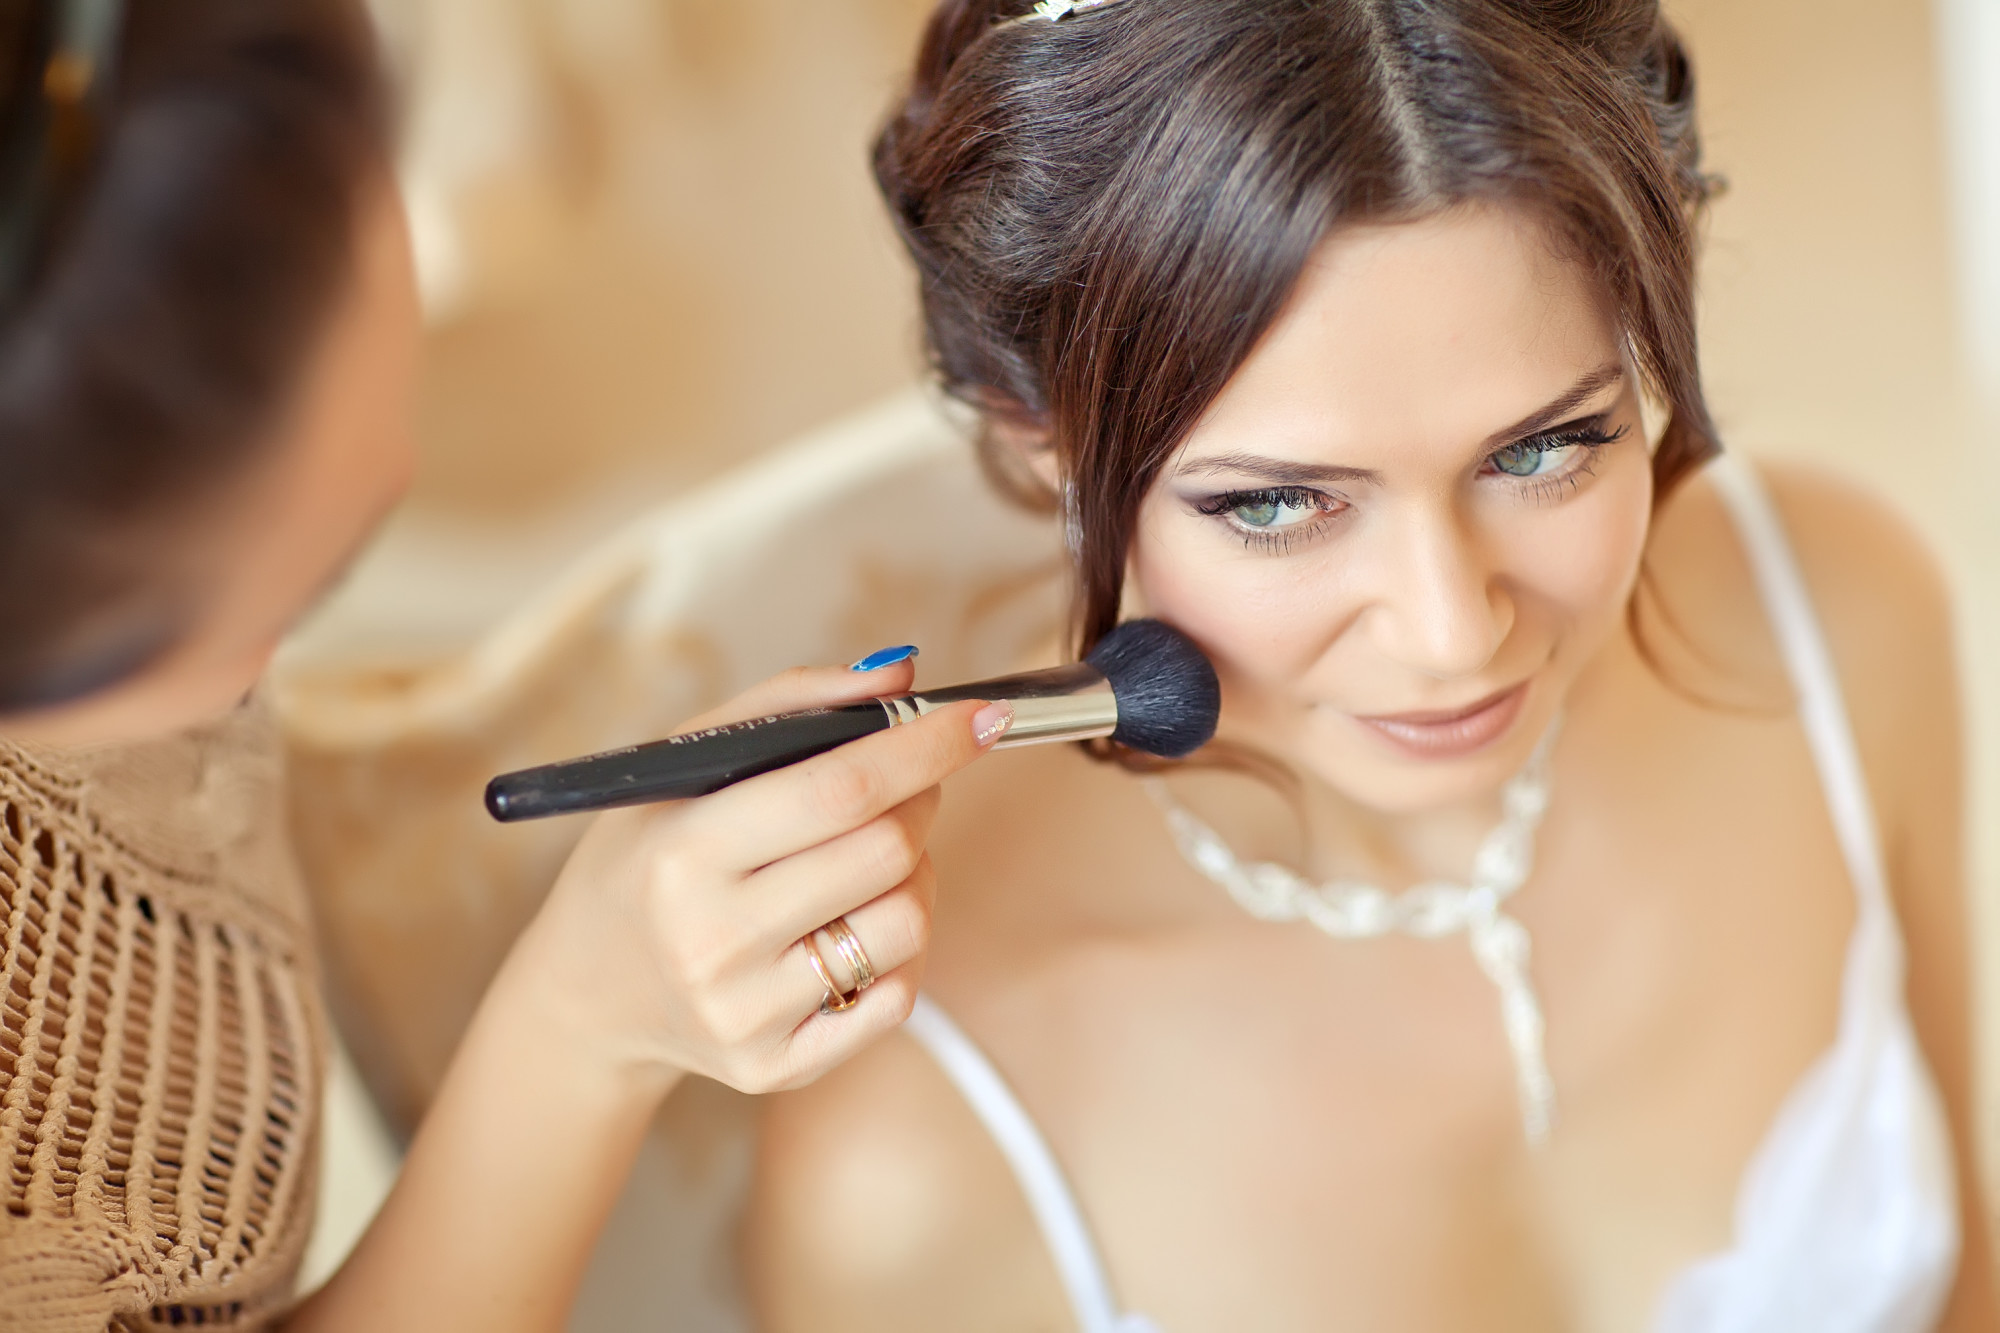 6 Reasons to Hire a Professional to Do Your Wedding Day Makeup